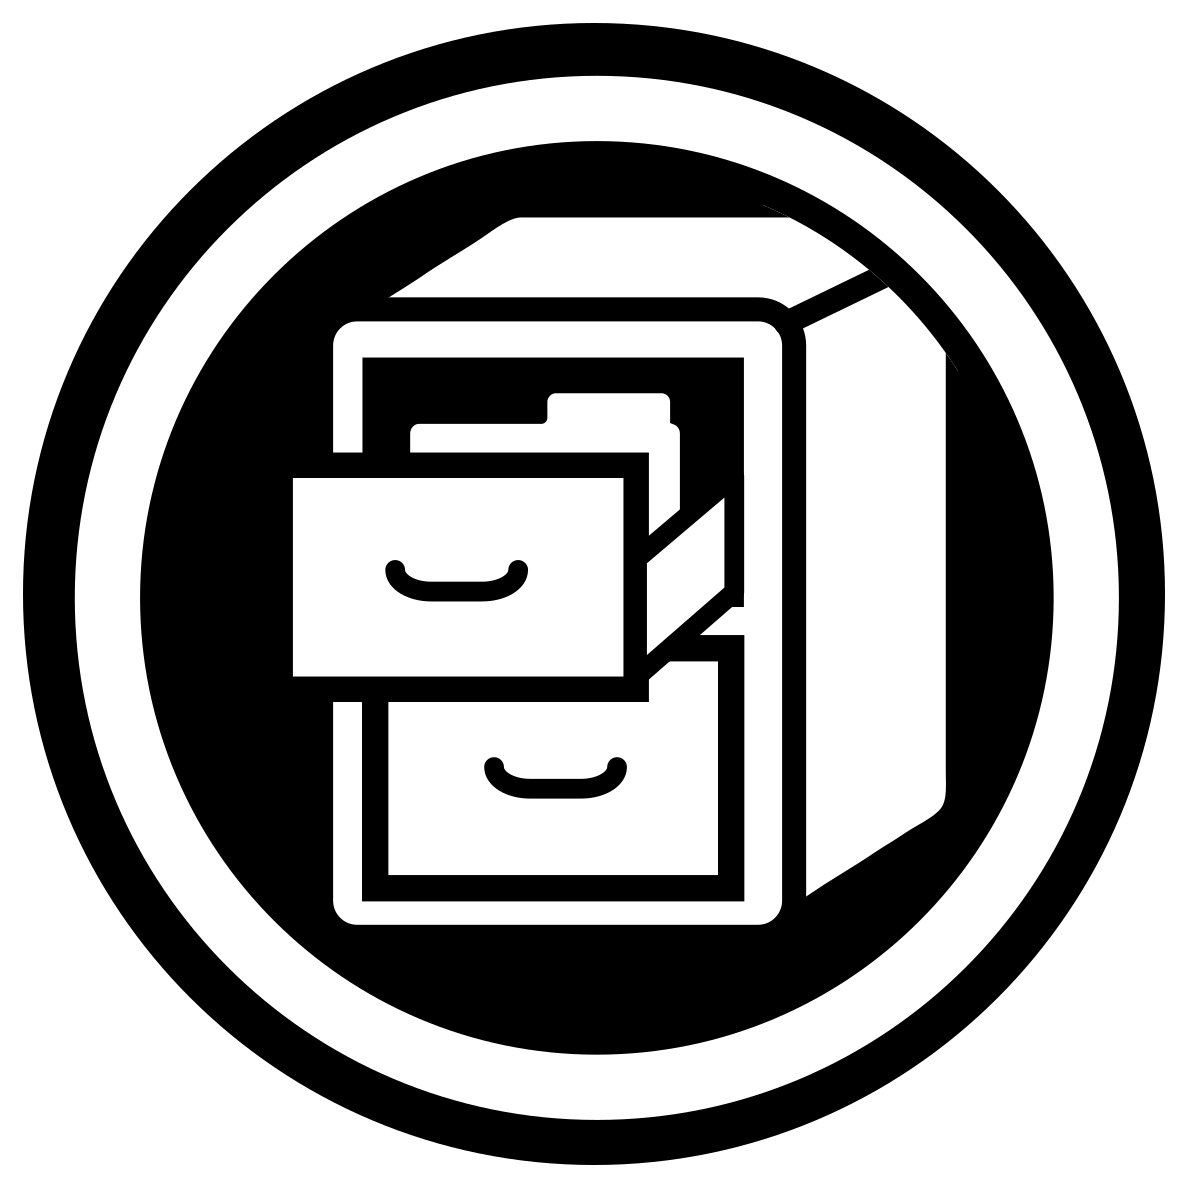 File:TK archive icon.svg - Wikimedia Commons